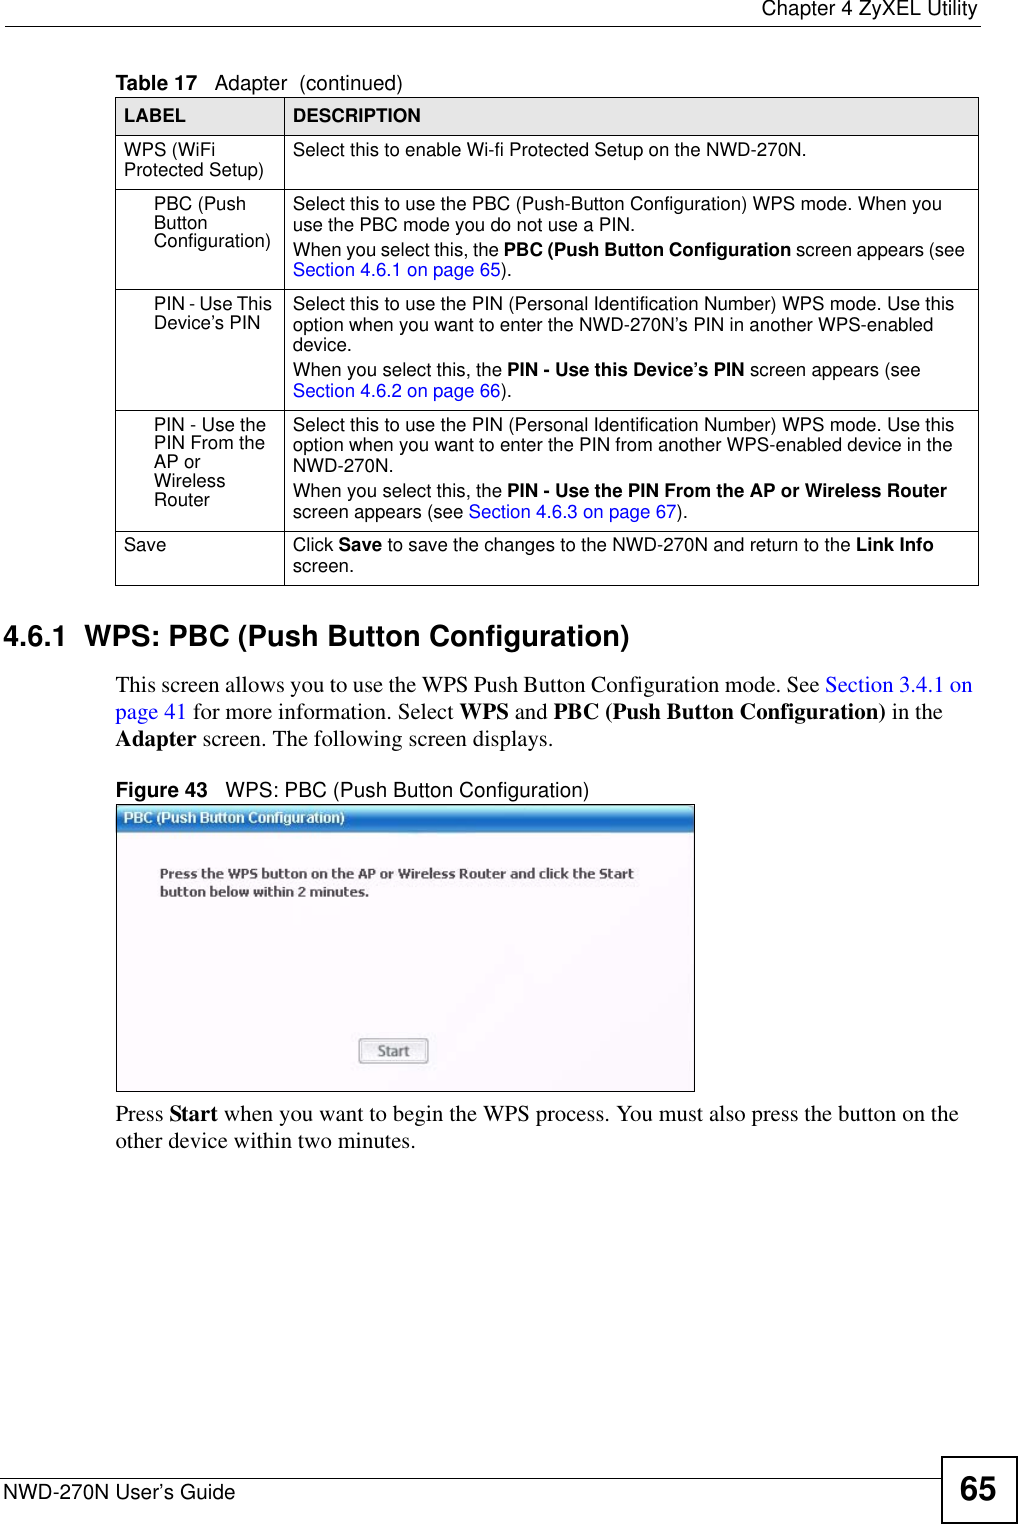  Chapter 4 ZyXEL UtilityNWD-270N User’s Guide 654.6.1  WPS: PBC (Push Button Configuration) This screen allows you to use the WPS Push Button Configuration mode. See Section 3.4.1 on page 41 for more information. Select WPS and PBC (Push Button Configuration) in the Adapter screen. The following screen displays.Figure 43   WPS: PBC (Push Button Configuration)Press Start when you want to begin the WPS process. You must also press the button on the other device within two minutes.WPS (WiFi Protected Setup) Select this to enable Wi-fi Protected Setup on the NWD-270N.PBC (Push Button Configuration)Select this to use the PBC (Push-Button Configuration) WPS mode. When you use the PBC mode you do not use a PIN. When you select this, the PBC (Push Button Configuration screen appears (see Section 4.6.1 on page 65).PIN - Use This Device’s PIN Select this to use the PIN (Personal Identification Number) WPS mode. Use this option when you want to enter the NWD-270N’s PIN in another WPS-enabled device.When you select this, the PIN - Use this Device’s PIN screen appears (see Section 4.6.2 on page 66).PIN - Use the PIN From the AP or Wireless RouterSelect this to use the PIN (Personal Identification Number) WPS mode. Use this option when you want to enter the PIN from another WPS-enabled device in the NWD-270N.When you select this, the PIN - Use the PIN From the AP or Wireless Router screen appears (see Section 4.6.3 on page 67).Save Click Save to save the changes to the NWD-270N and return to the Link Info screen.Table 17   Adapter  (continued)LABEL DESCRIPTION